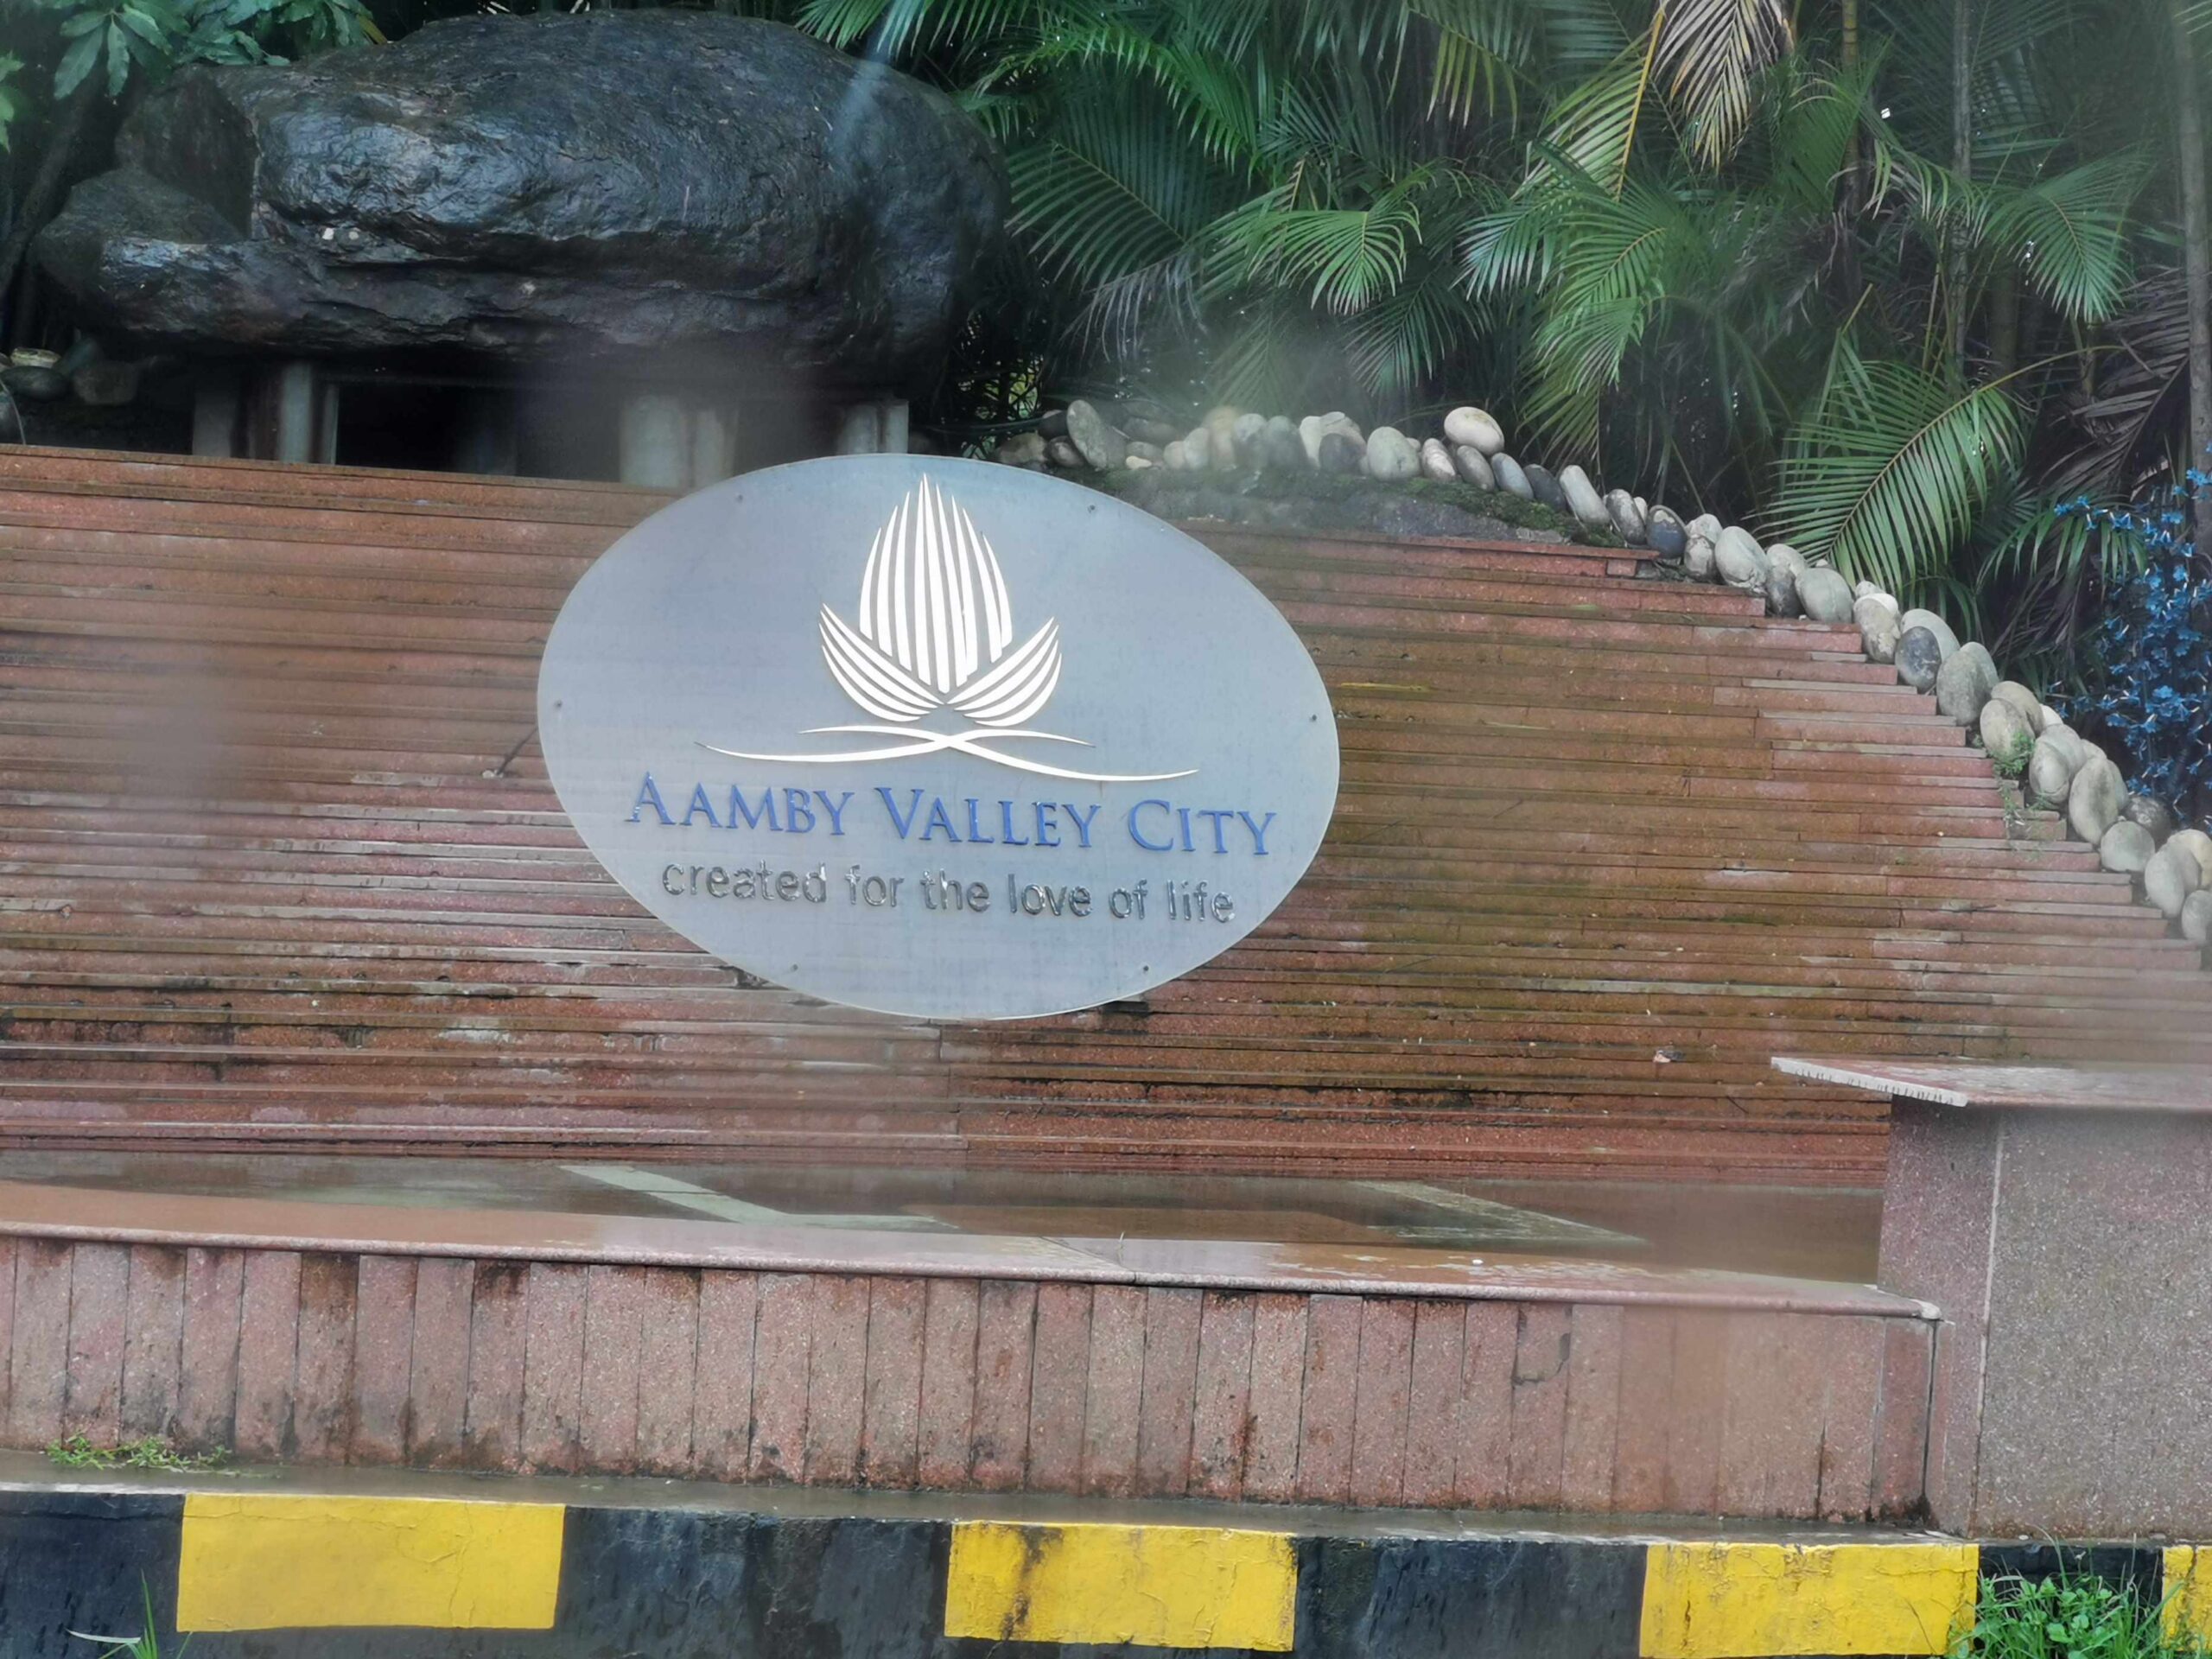 Aamby Valey